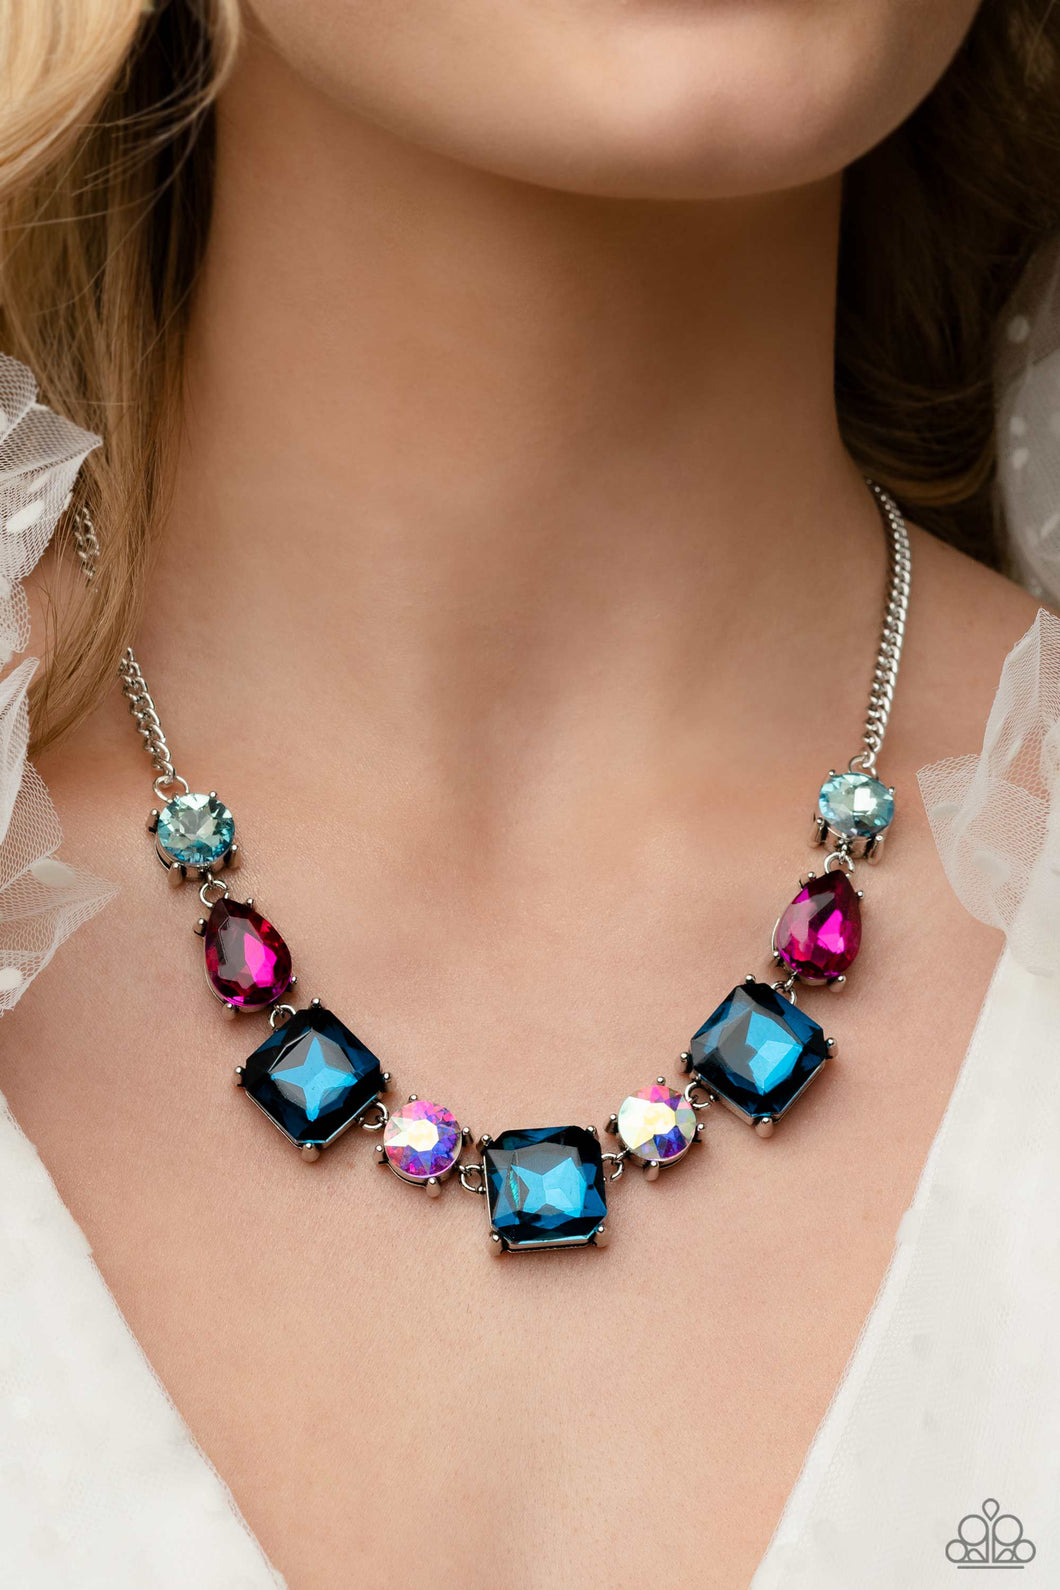 Paparazzi Elevated Edge Multi Necklace. March 2023 Life of the Party $5 Necklace. P2RE-MTXX-215XX